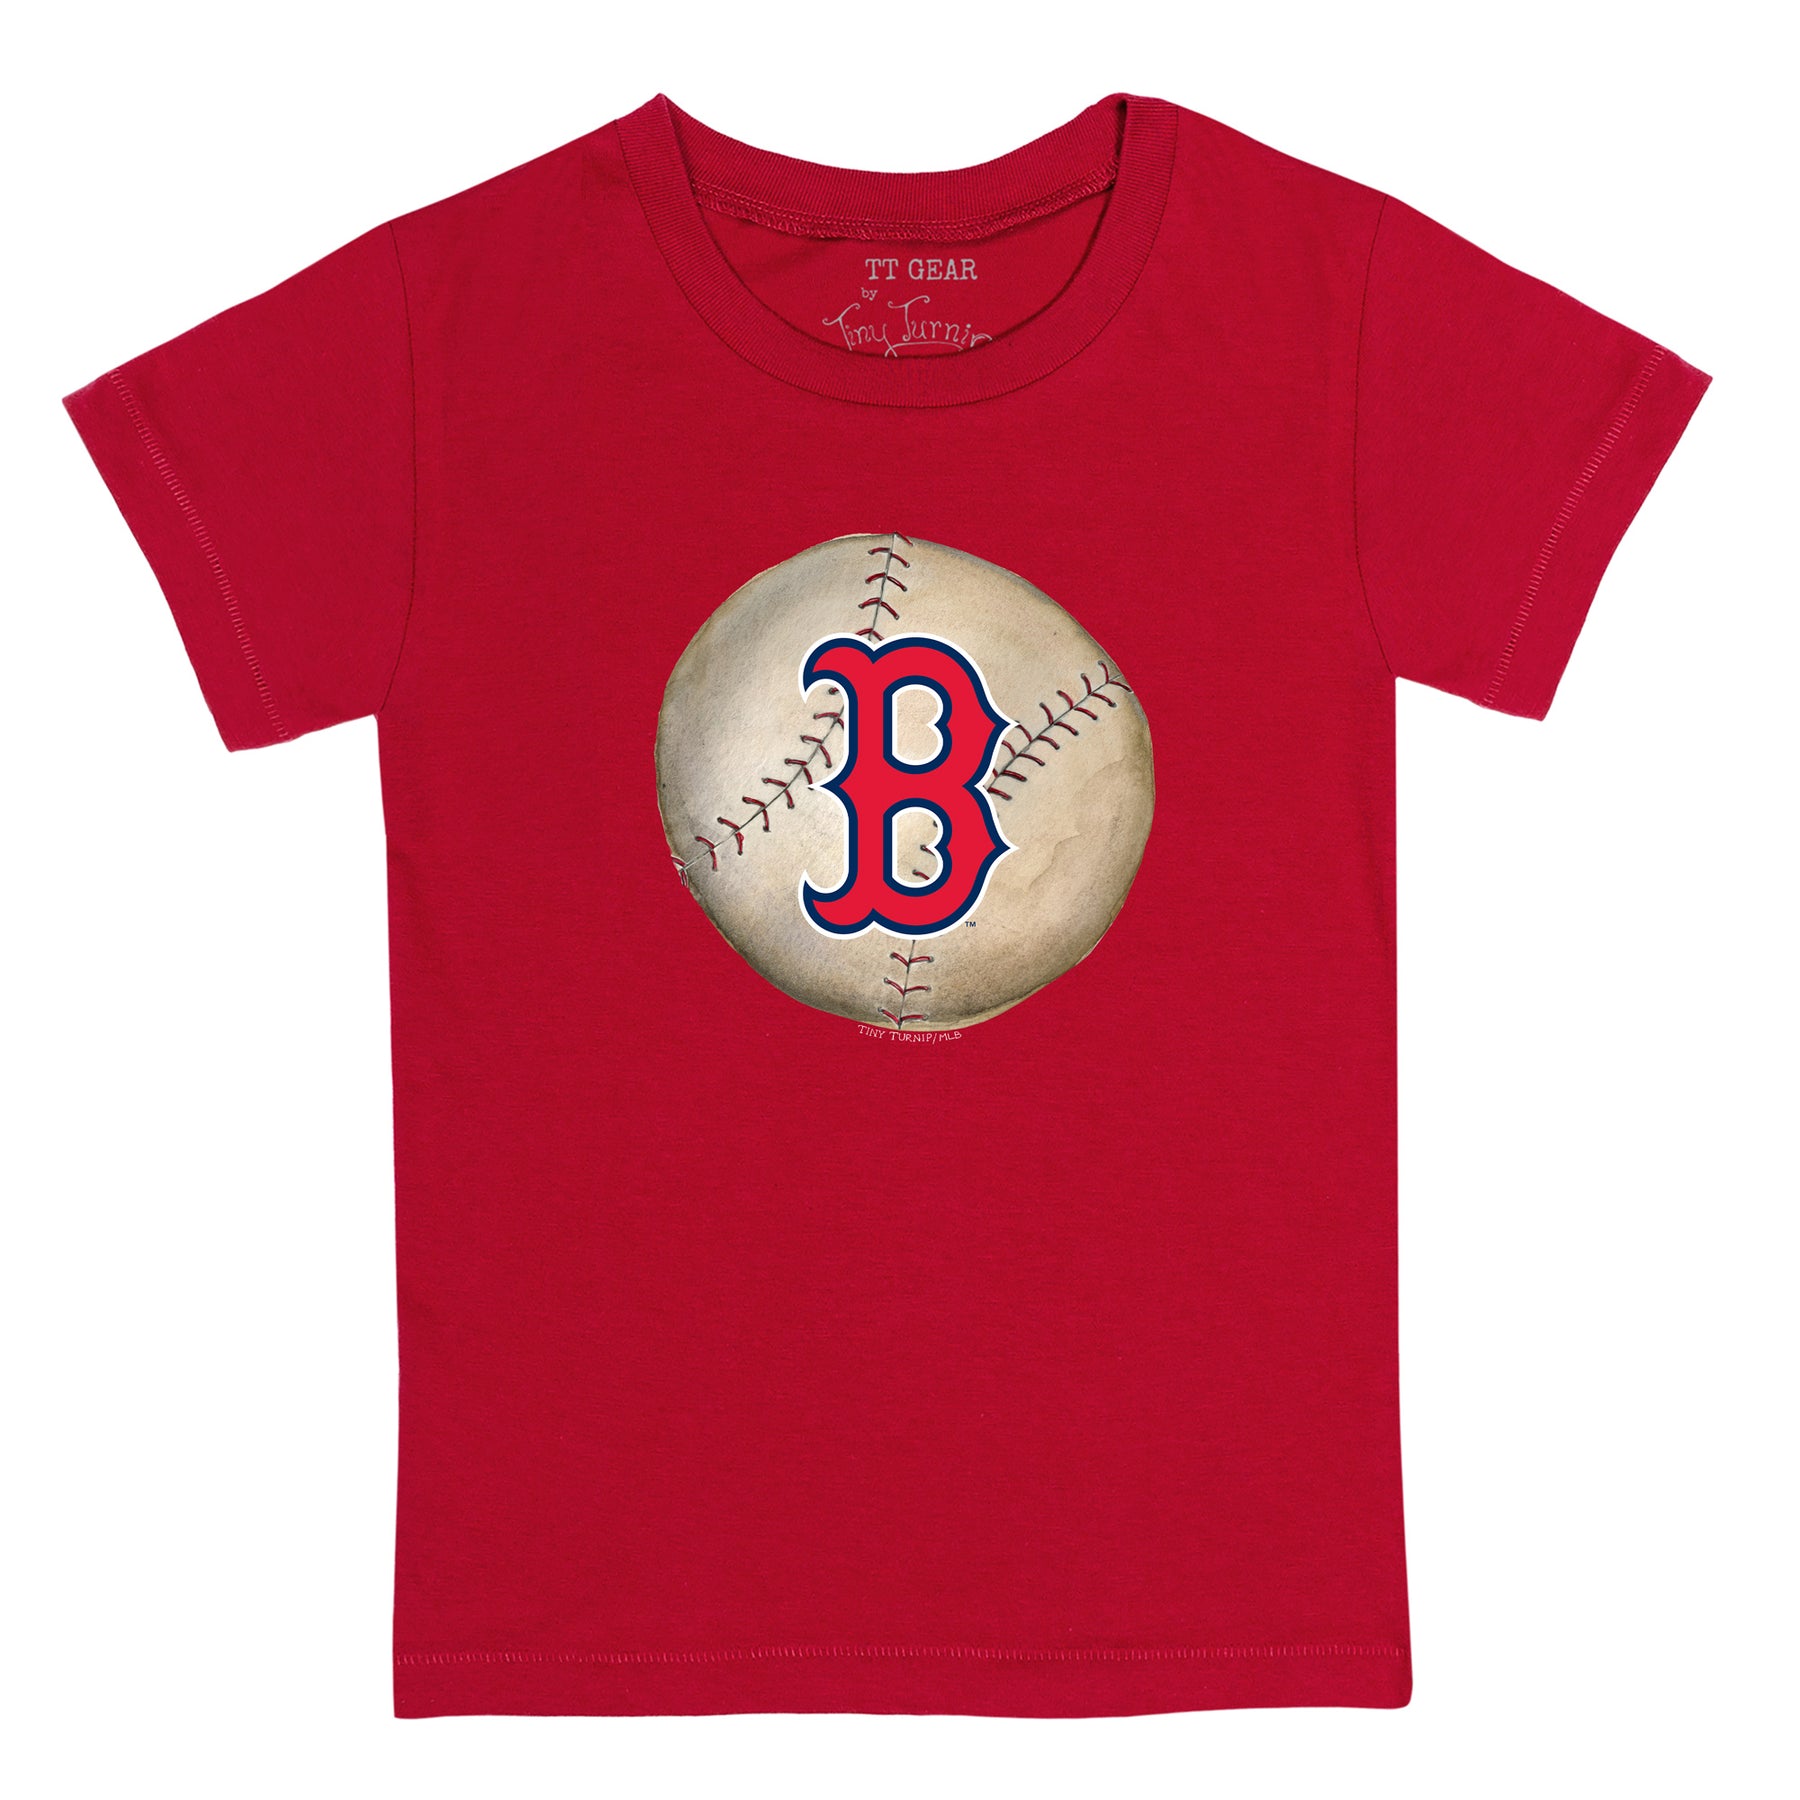 Official Boston Red Sox Clothing, Red Sox Collection, Red Sox Clothing Gear